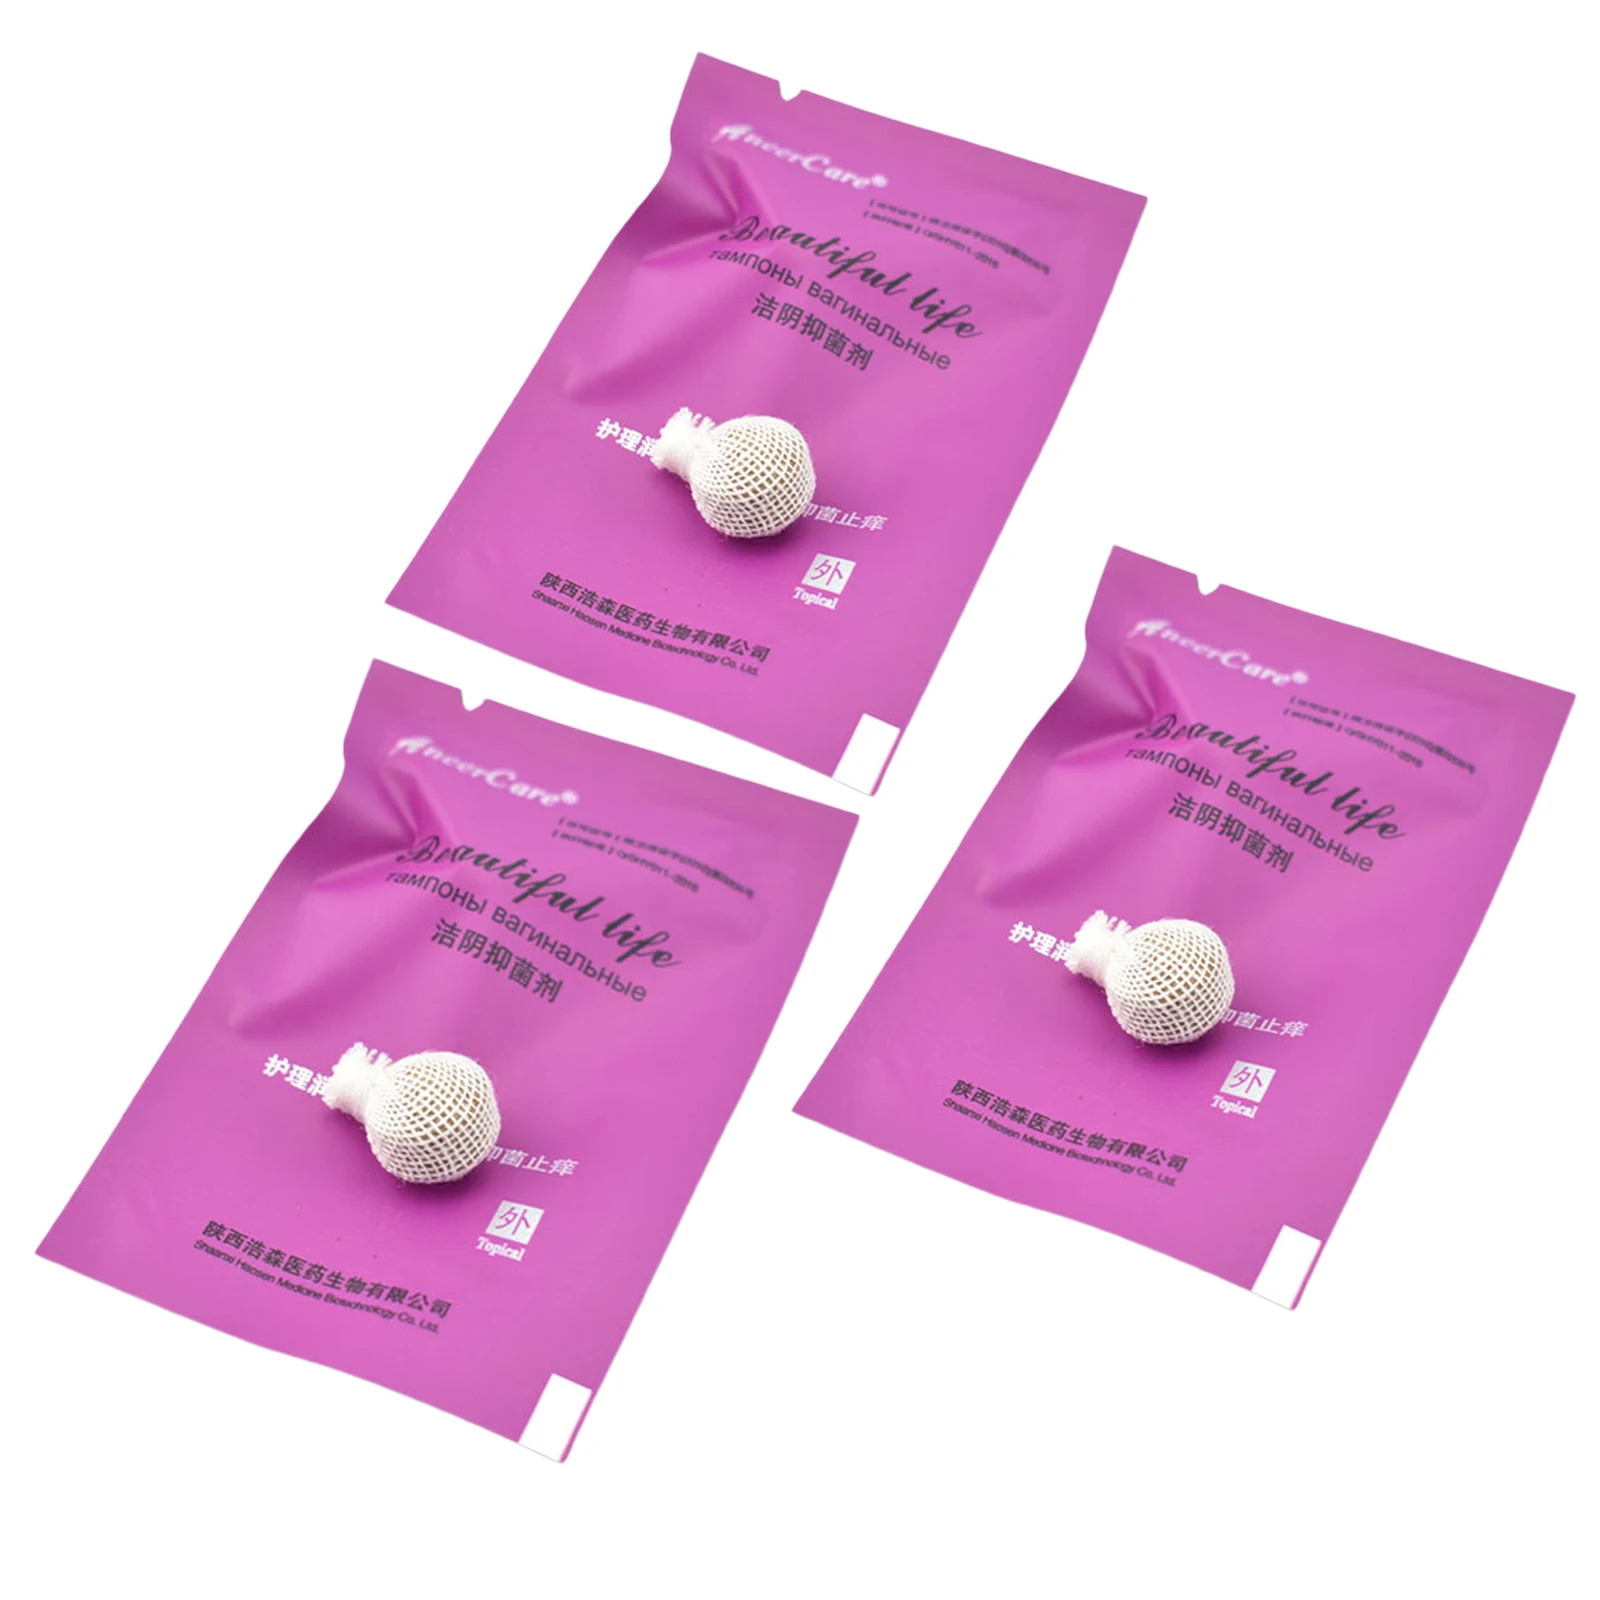 Female Women Herb Tampons Vaginal Detox Yoni Pearls Disposable Swab Cleansing Hygiene Treatment Healthy Care